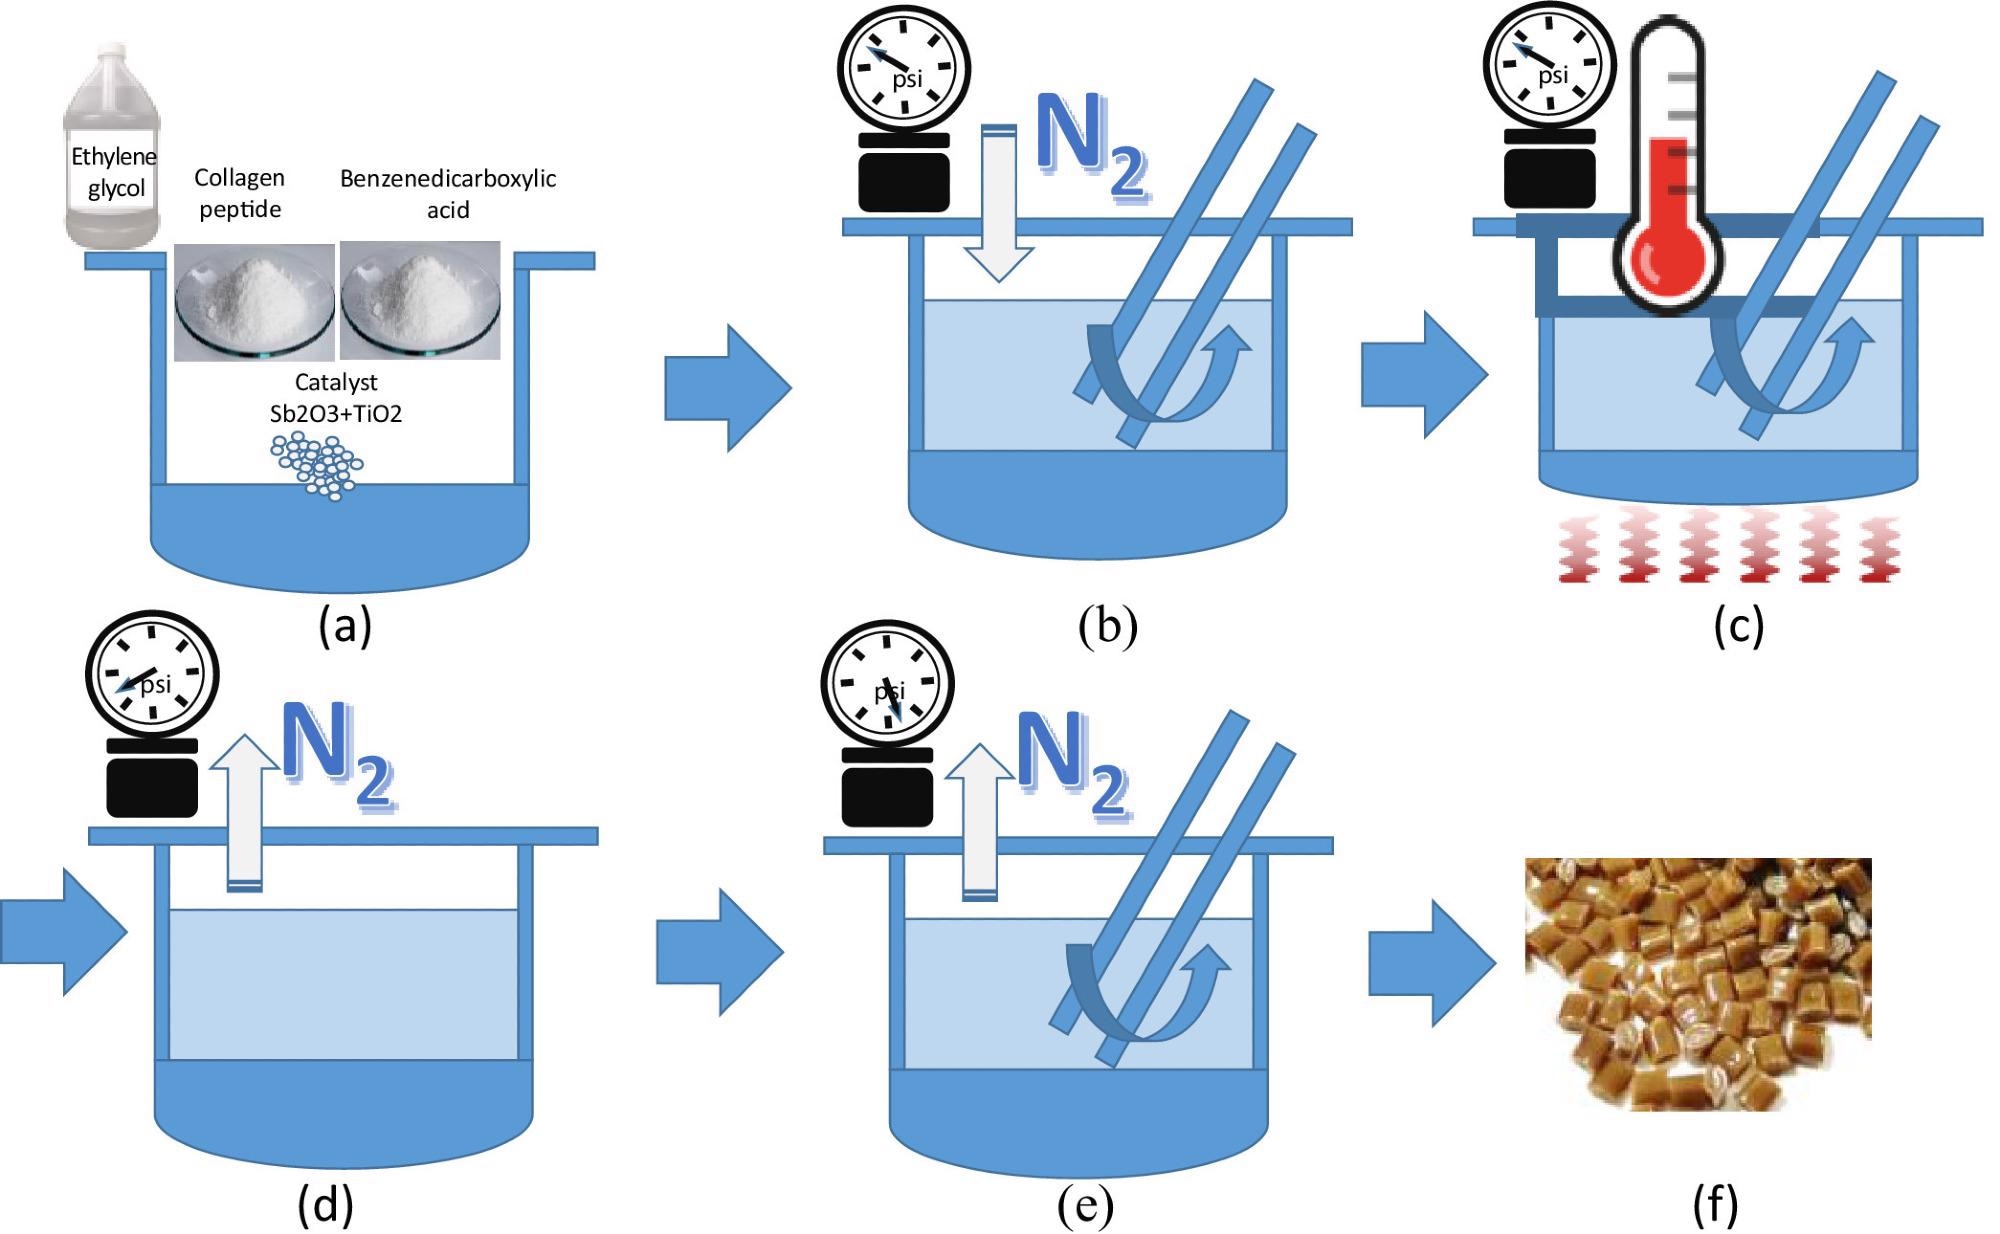 The stages of supramolecular polymerization. (a) mixing of raw materials and catalysts, (b) Introducing nitrogen into the container and stirring the mixture, (c) Heating the mixture for executing an esterification reaction from 210°C to 270°C, (d) Decreasing the pressure to 20 torr in the container for a polycondensation reaction, (e) Decreasing the pressure to 3 torr in the container and forming copolyester material and (f) the produced bionic polyester pellets. The values of pressure are not limited thereto and can be changed in accordance with the needs.